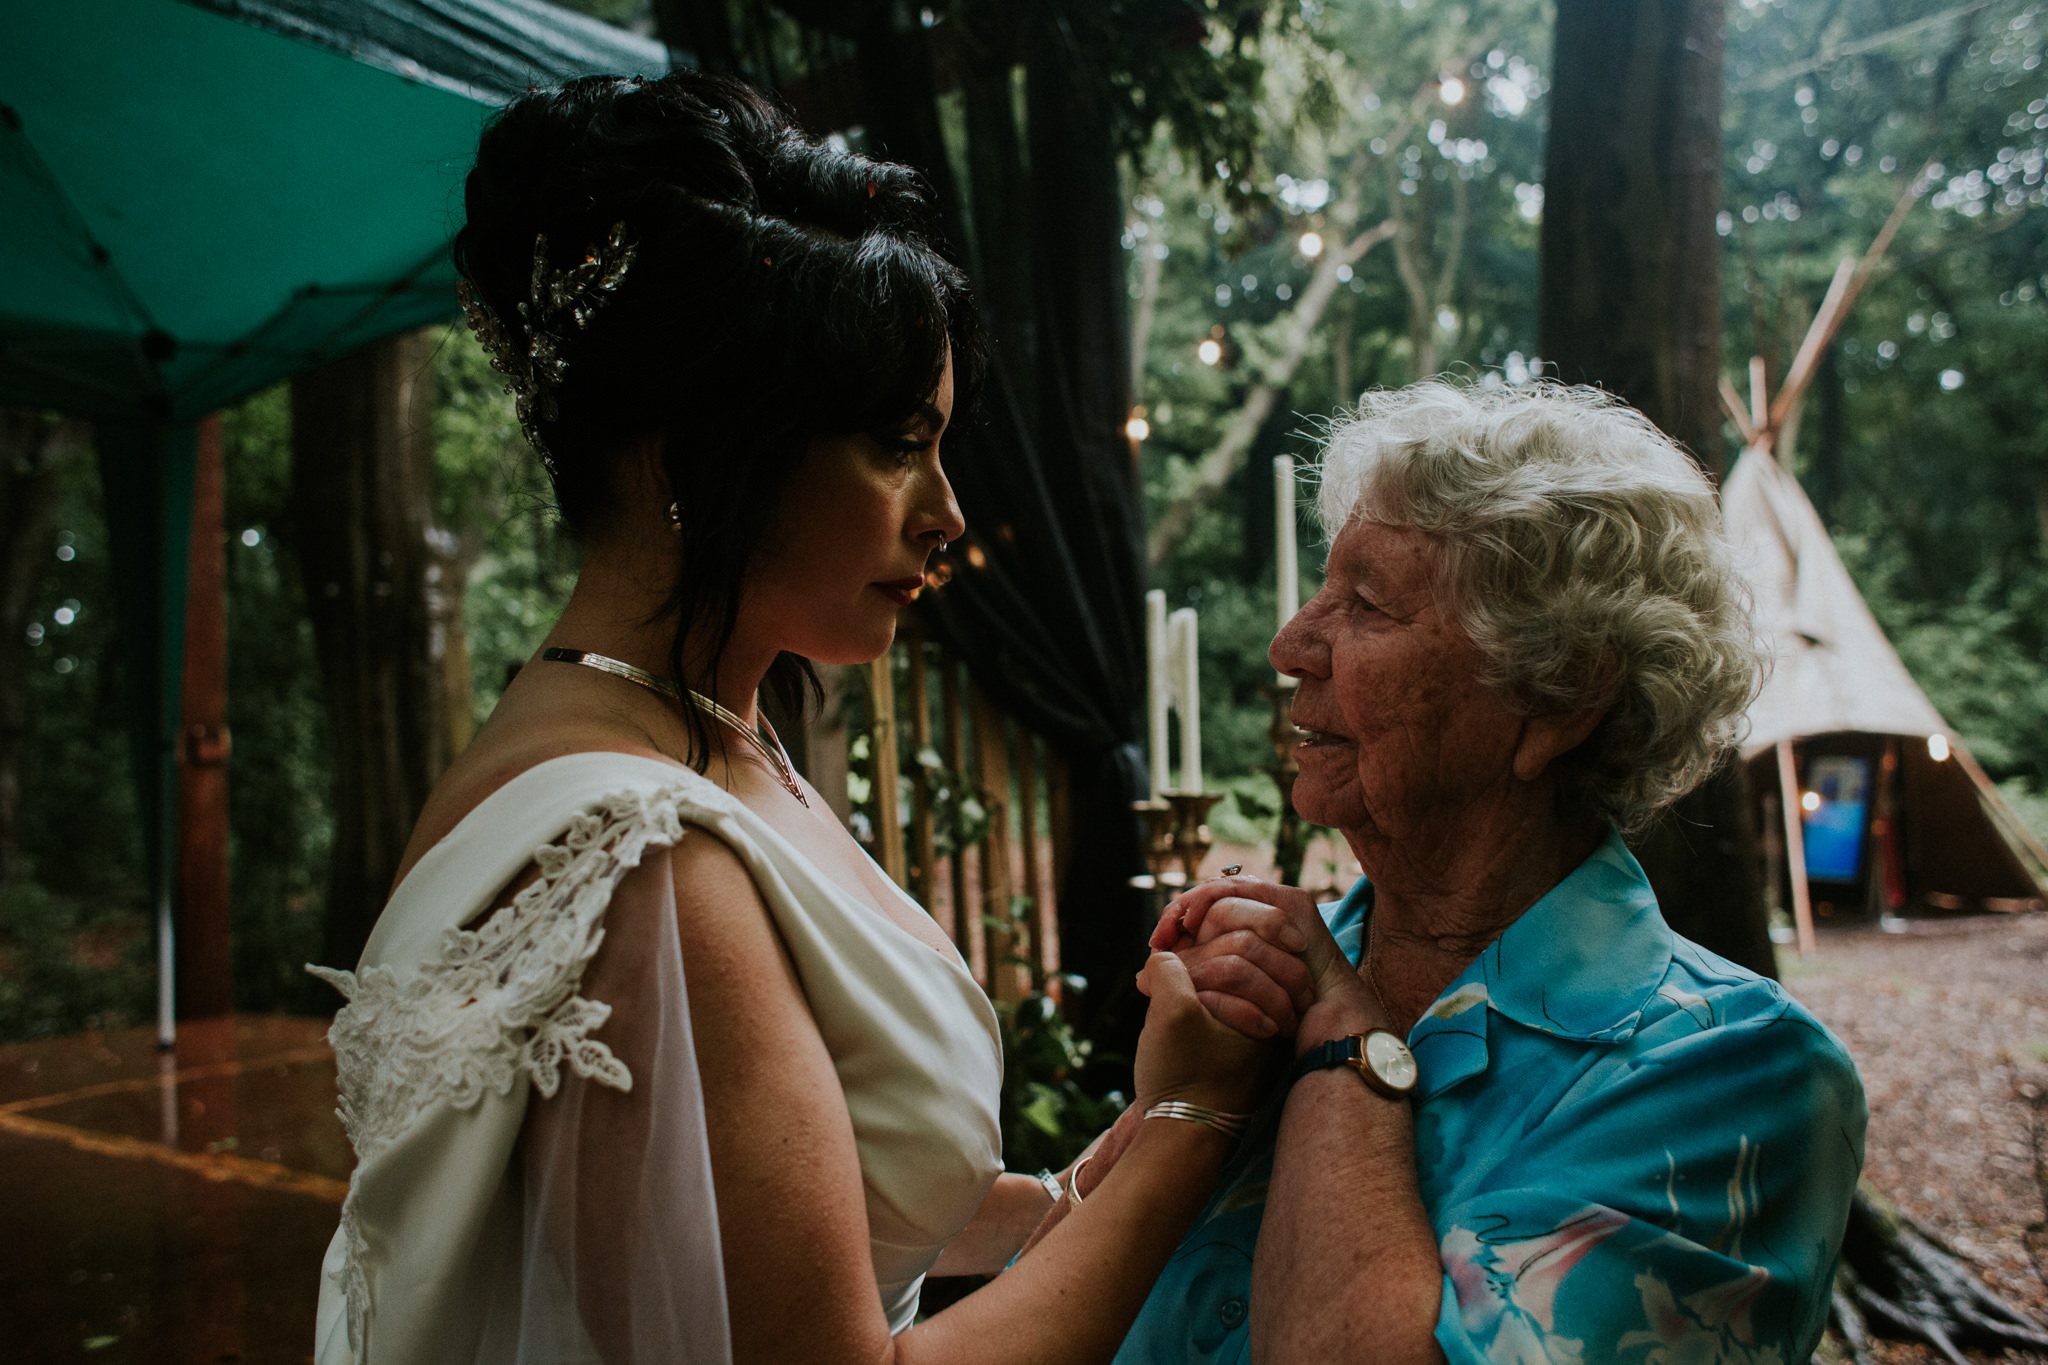 The bride speaks to a guest at her wedding